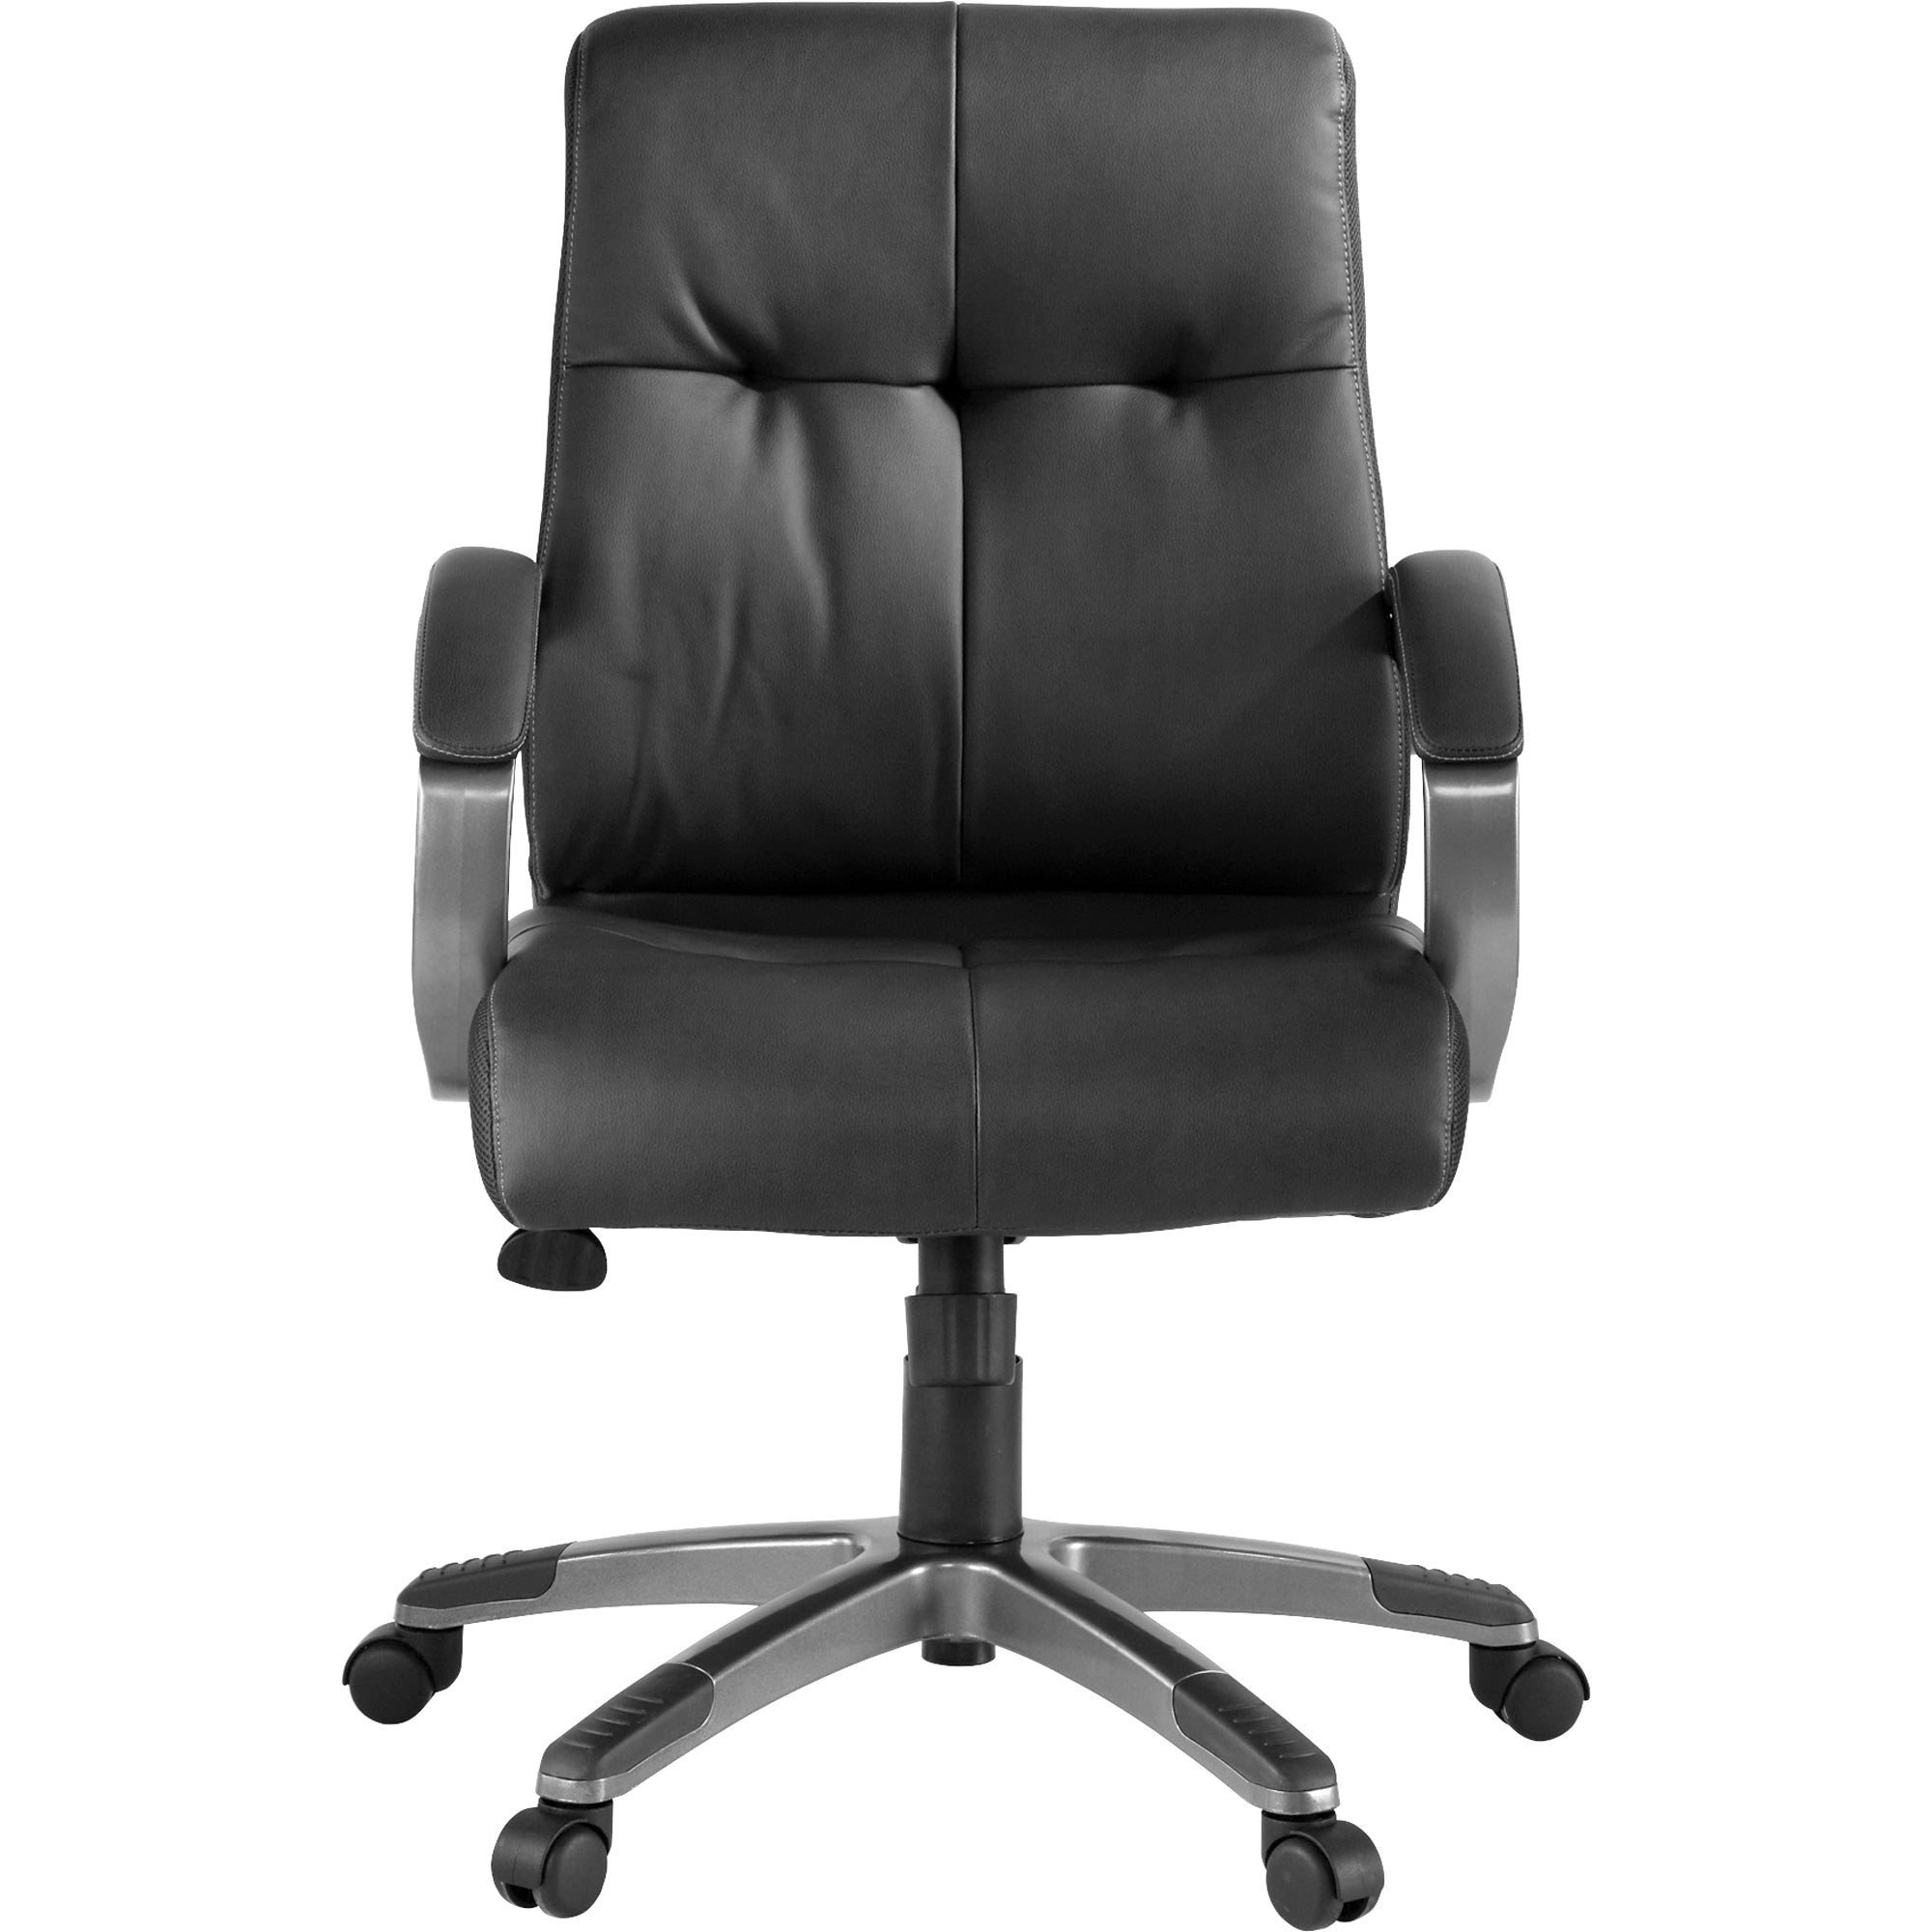 Lorell Low-back Executive Office Chair - Black Leather Seat - 5-star Base - Black - 1 Each - 